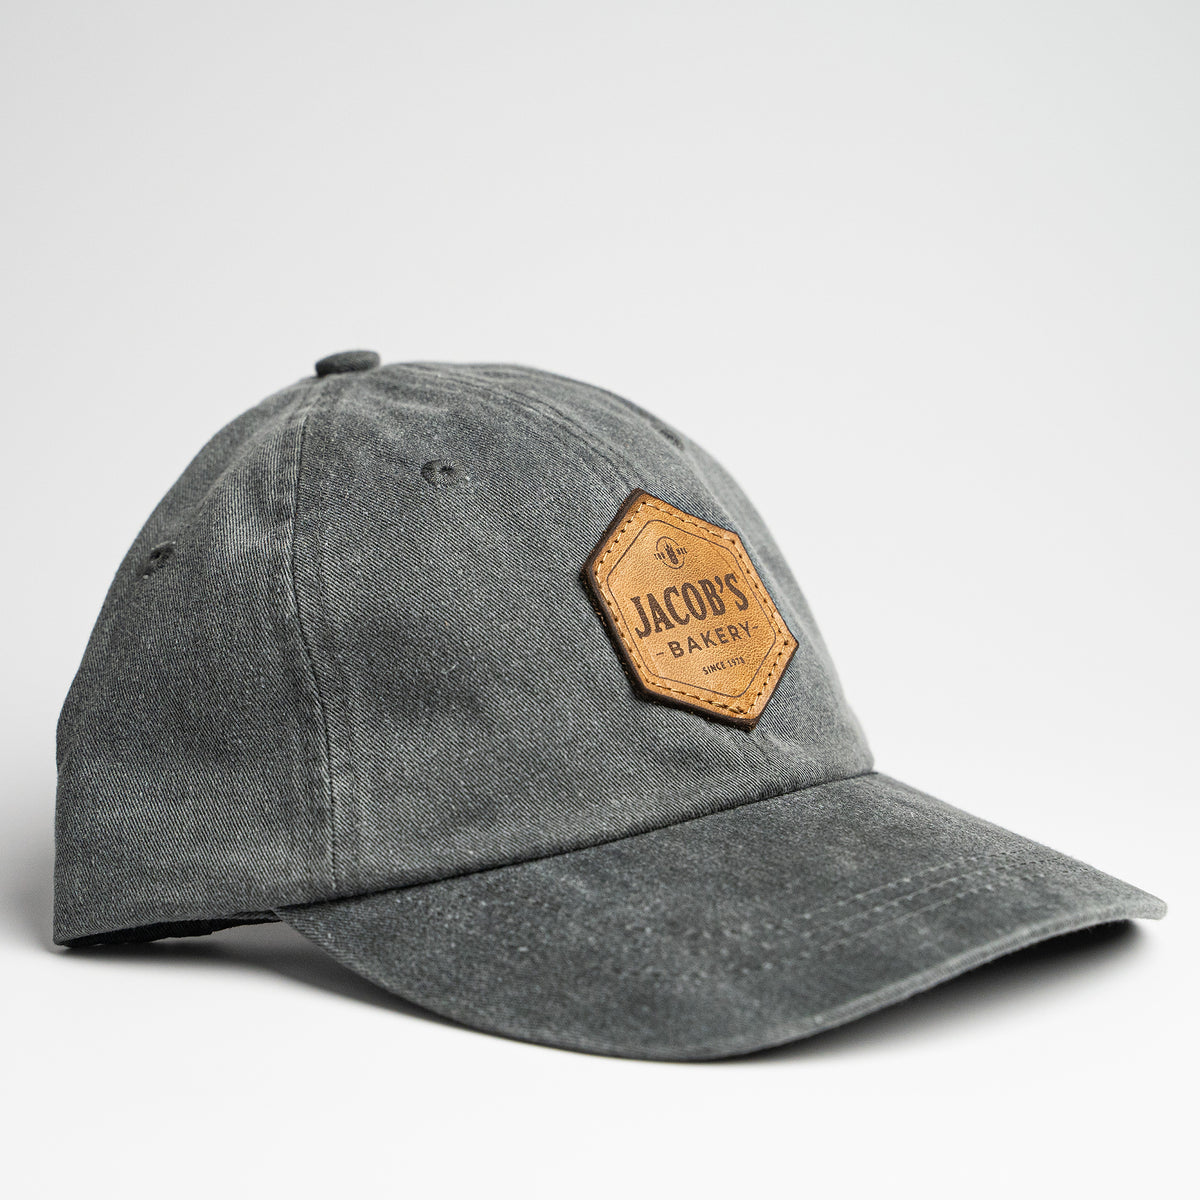 Adams 969 Unstructured Custom Leather Patch Cap with YOUR LOGO